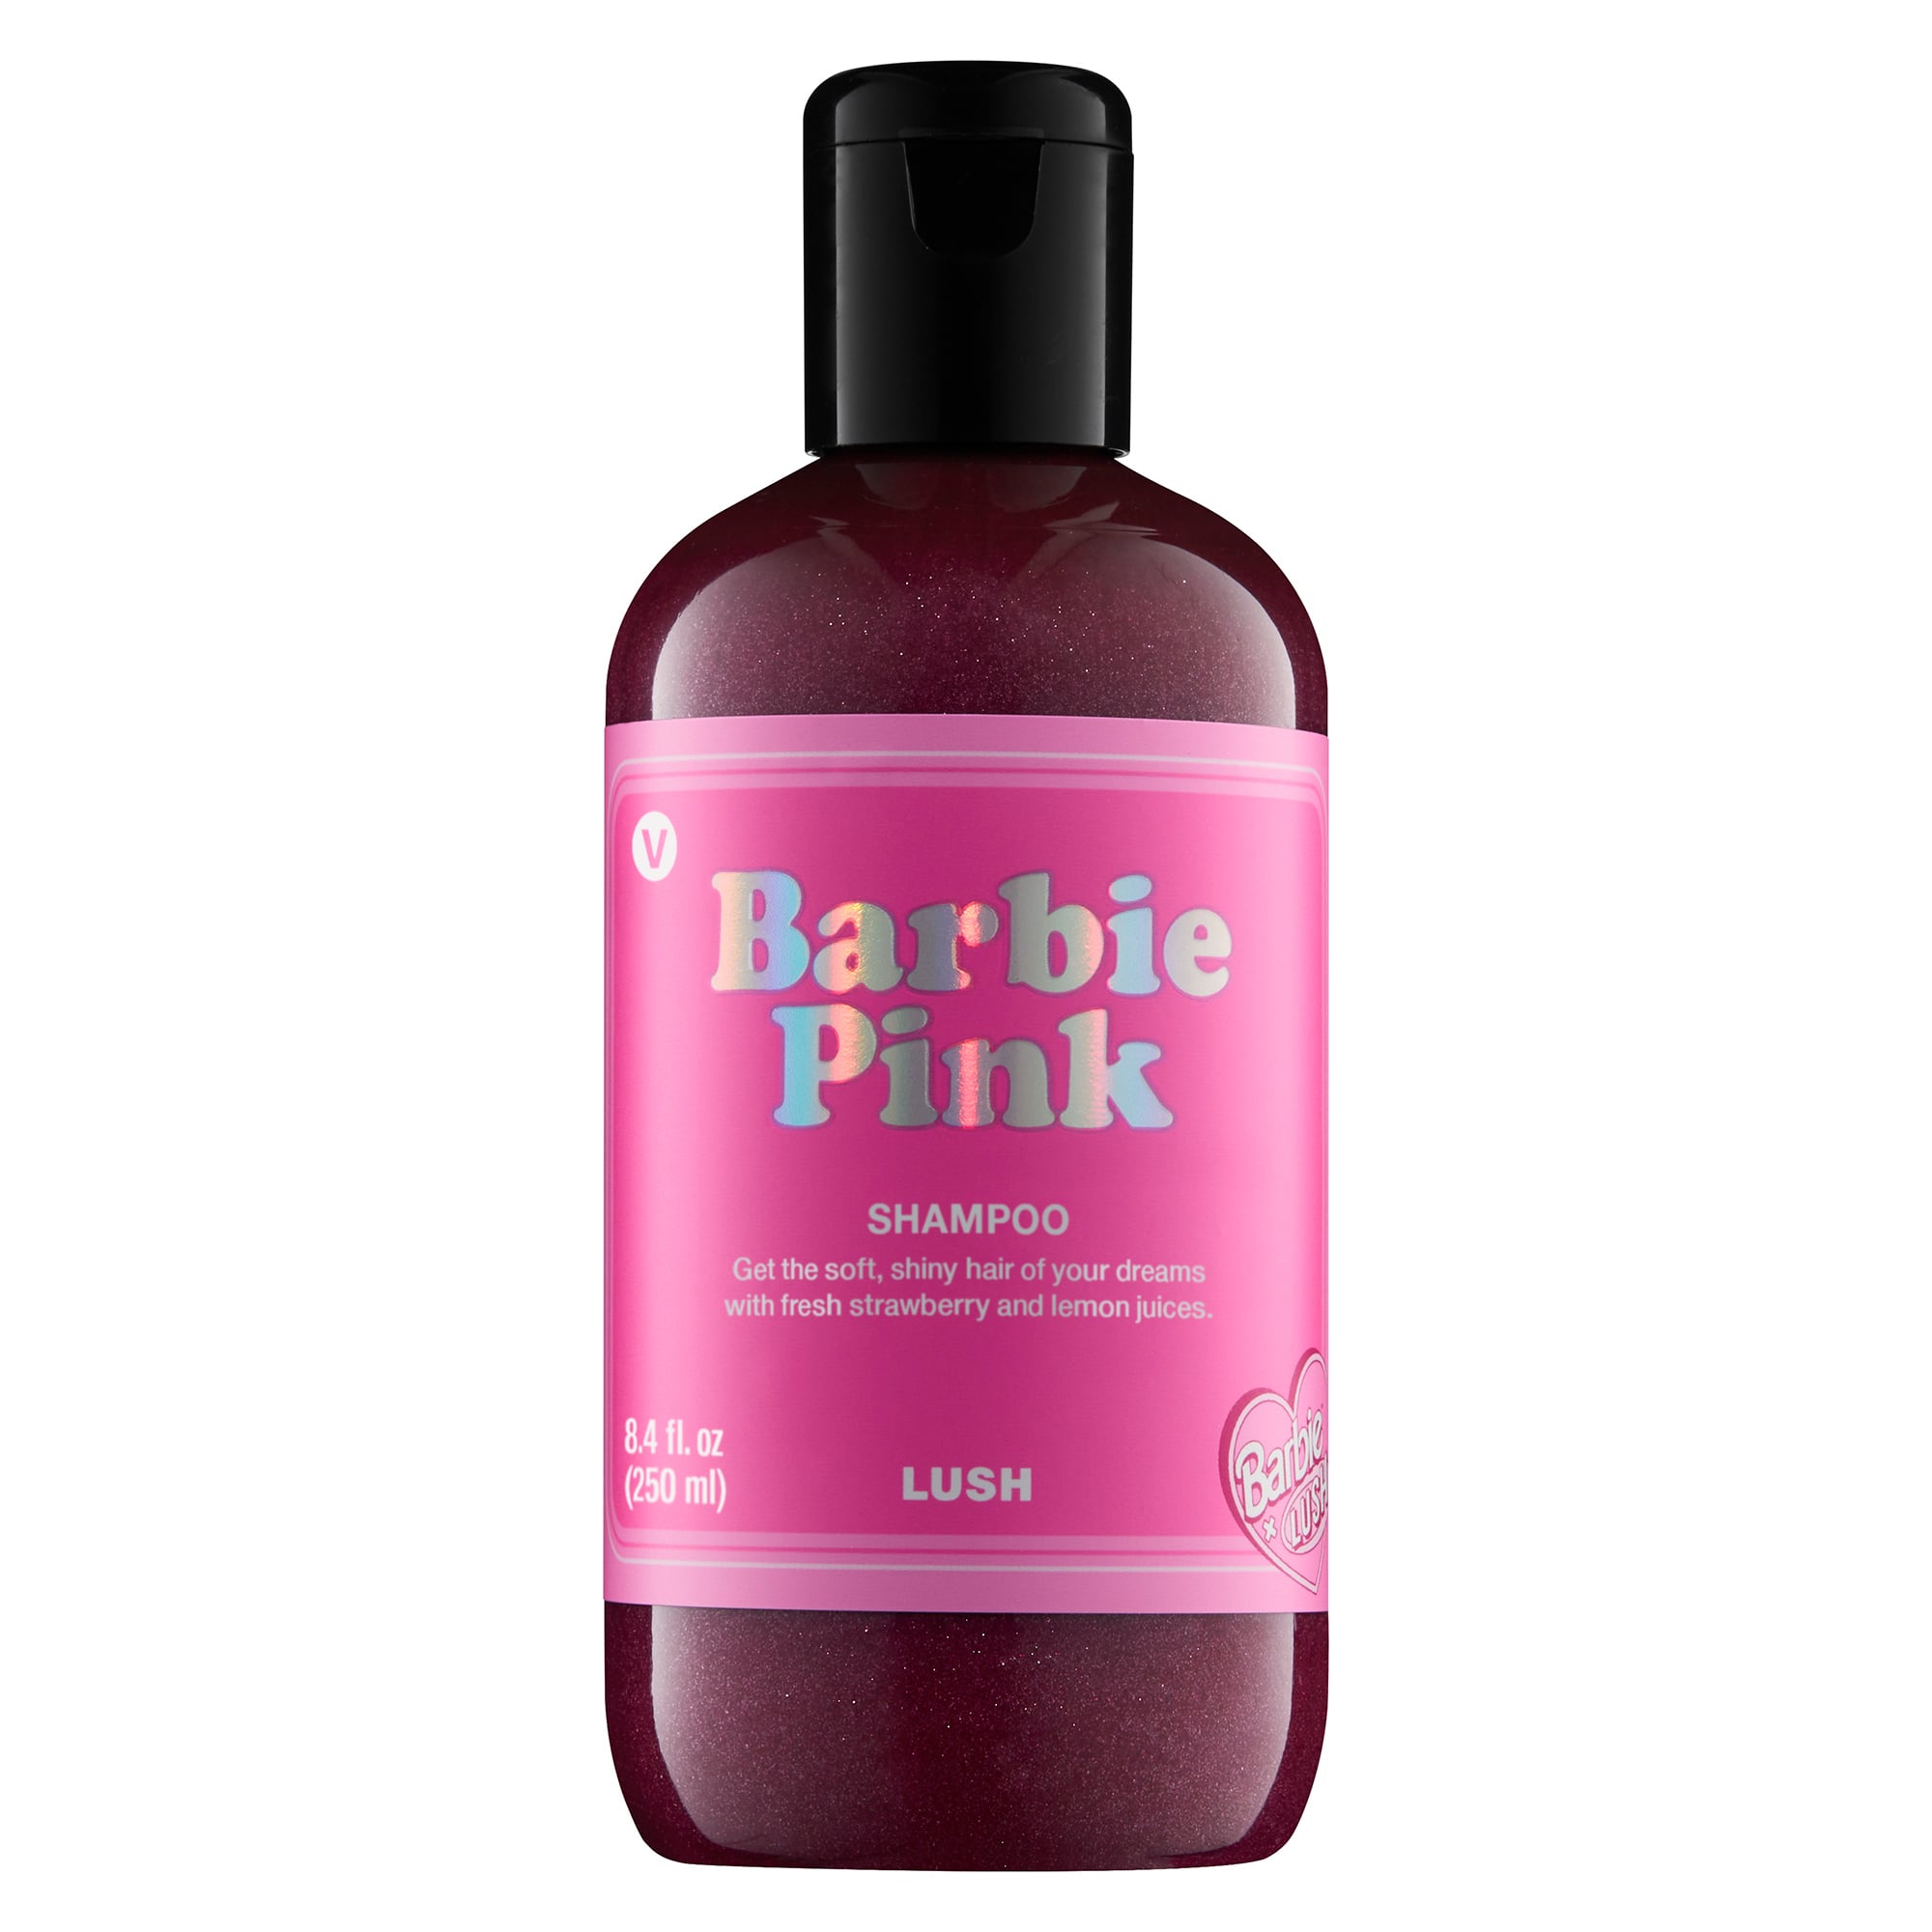 Lush's Barbie Collection: Shop the Products